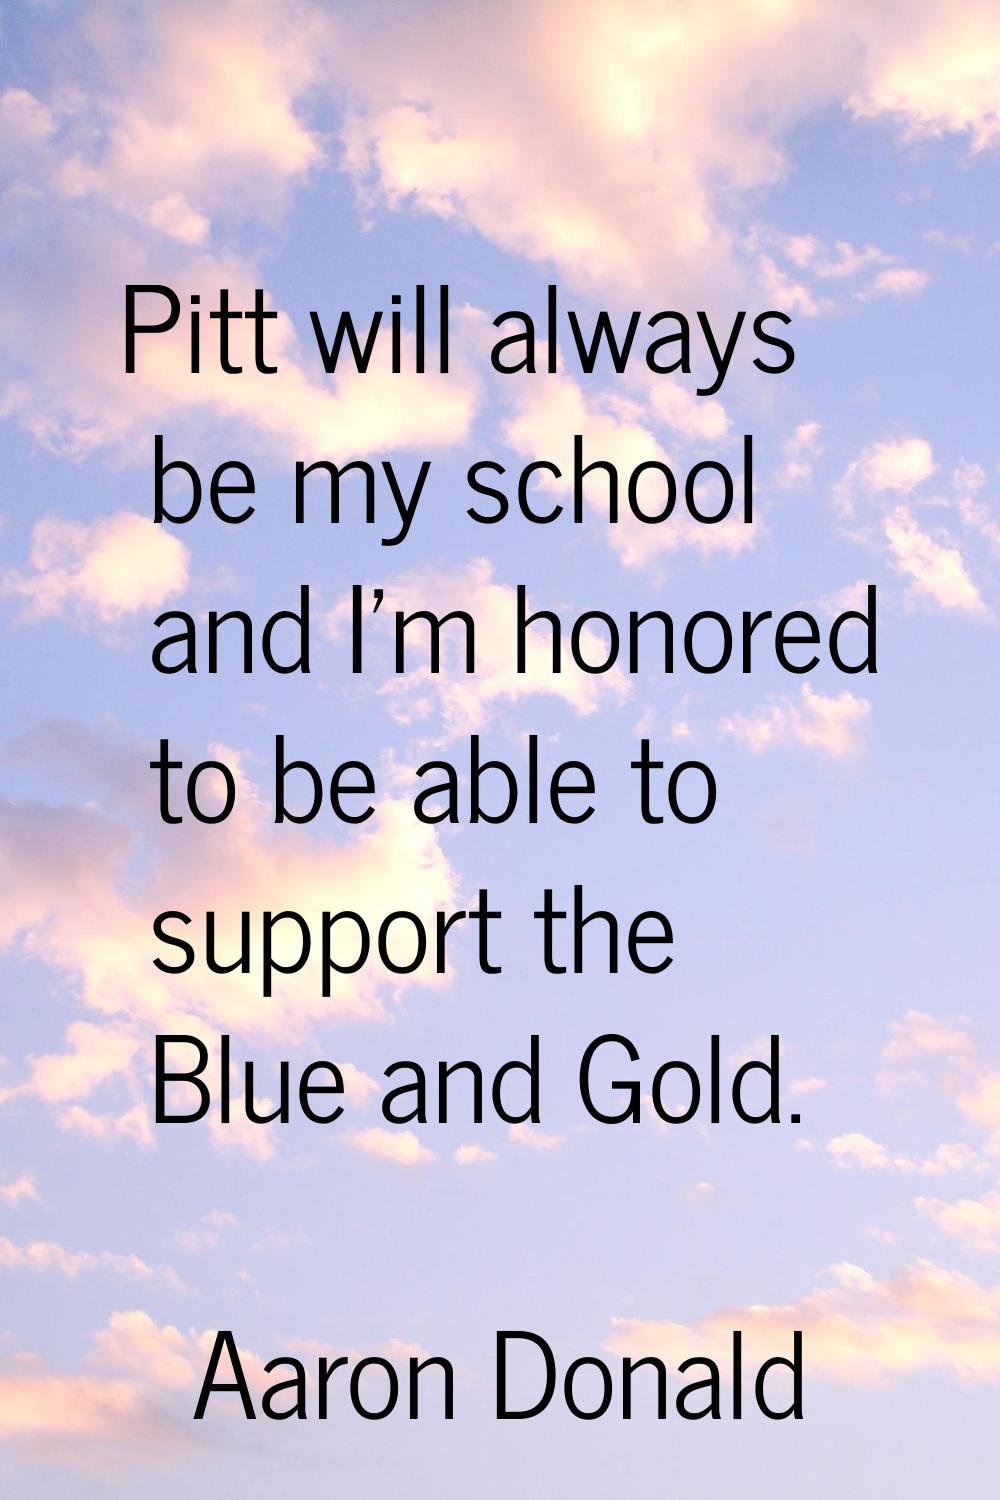 Pitt will always be my school and I'm honored to be able to support the Blue and Gold.